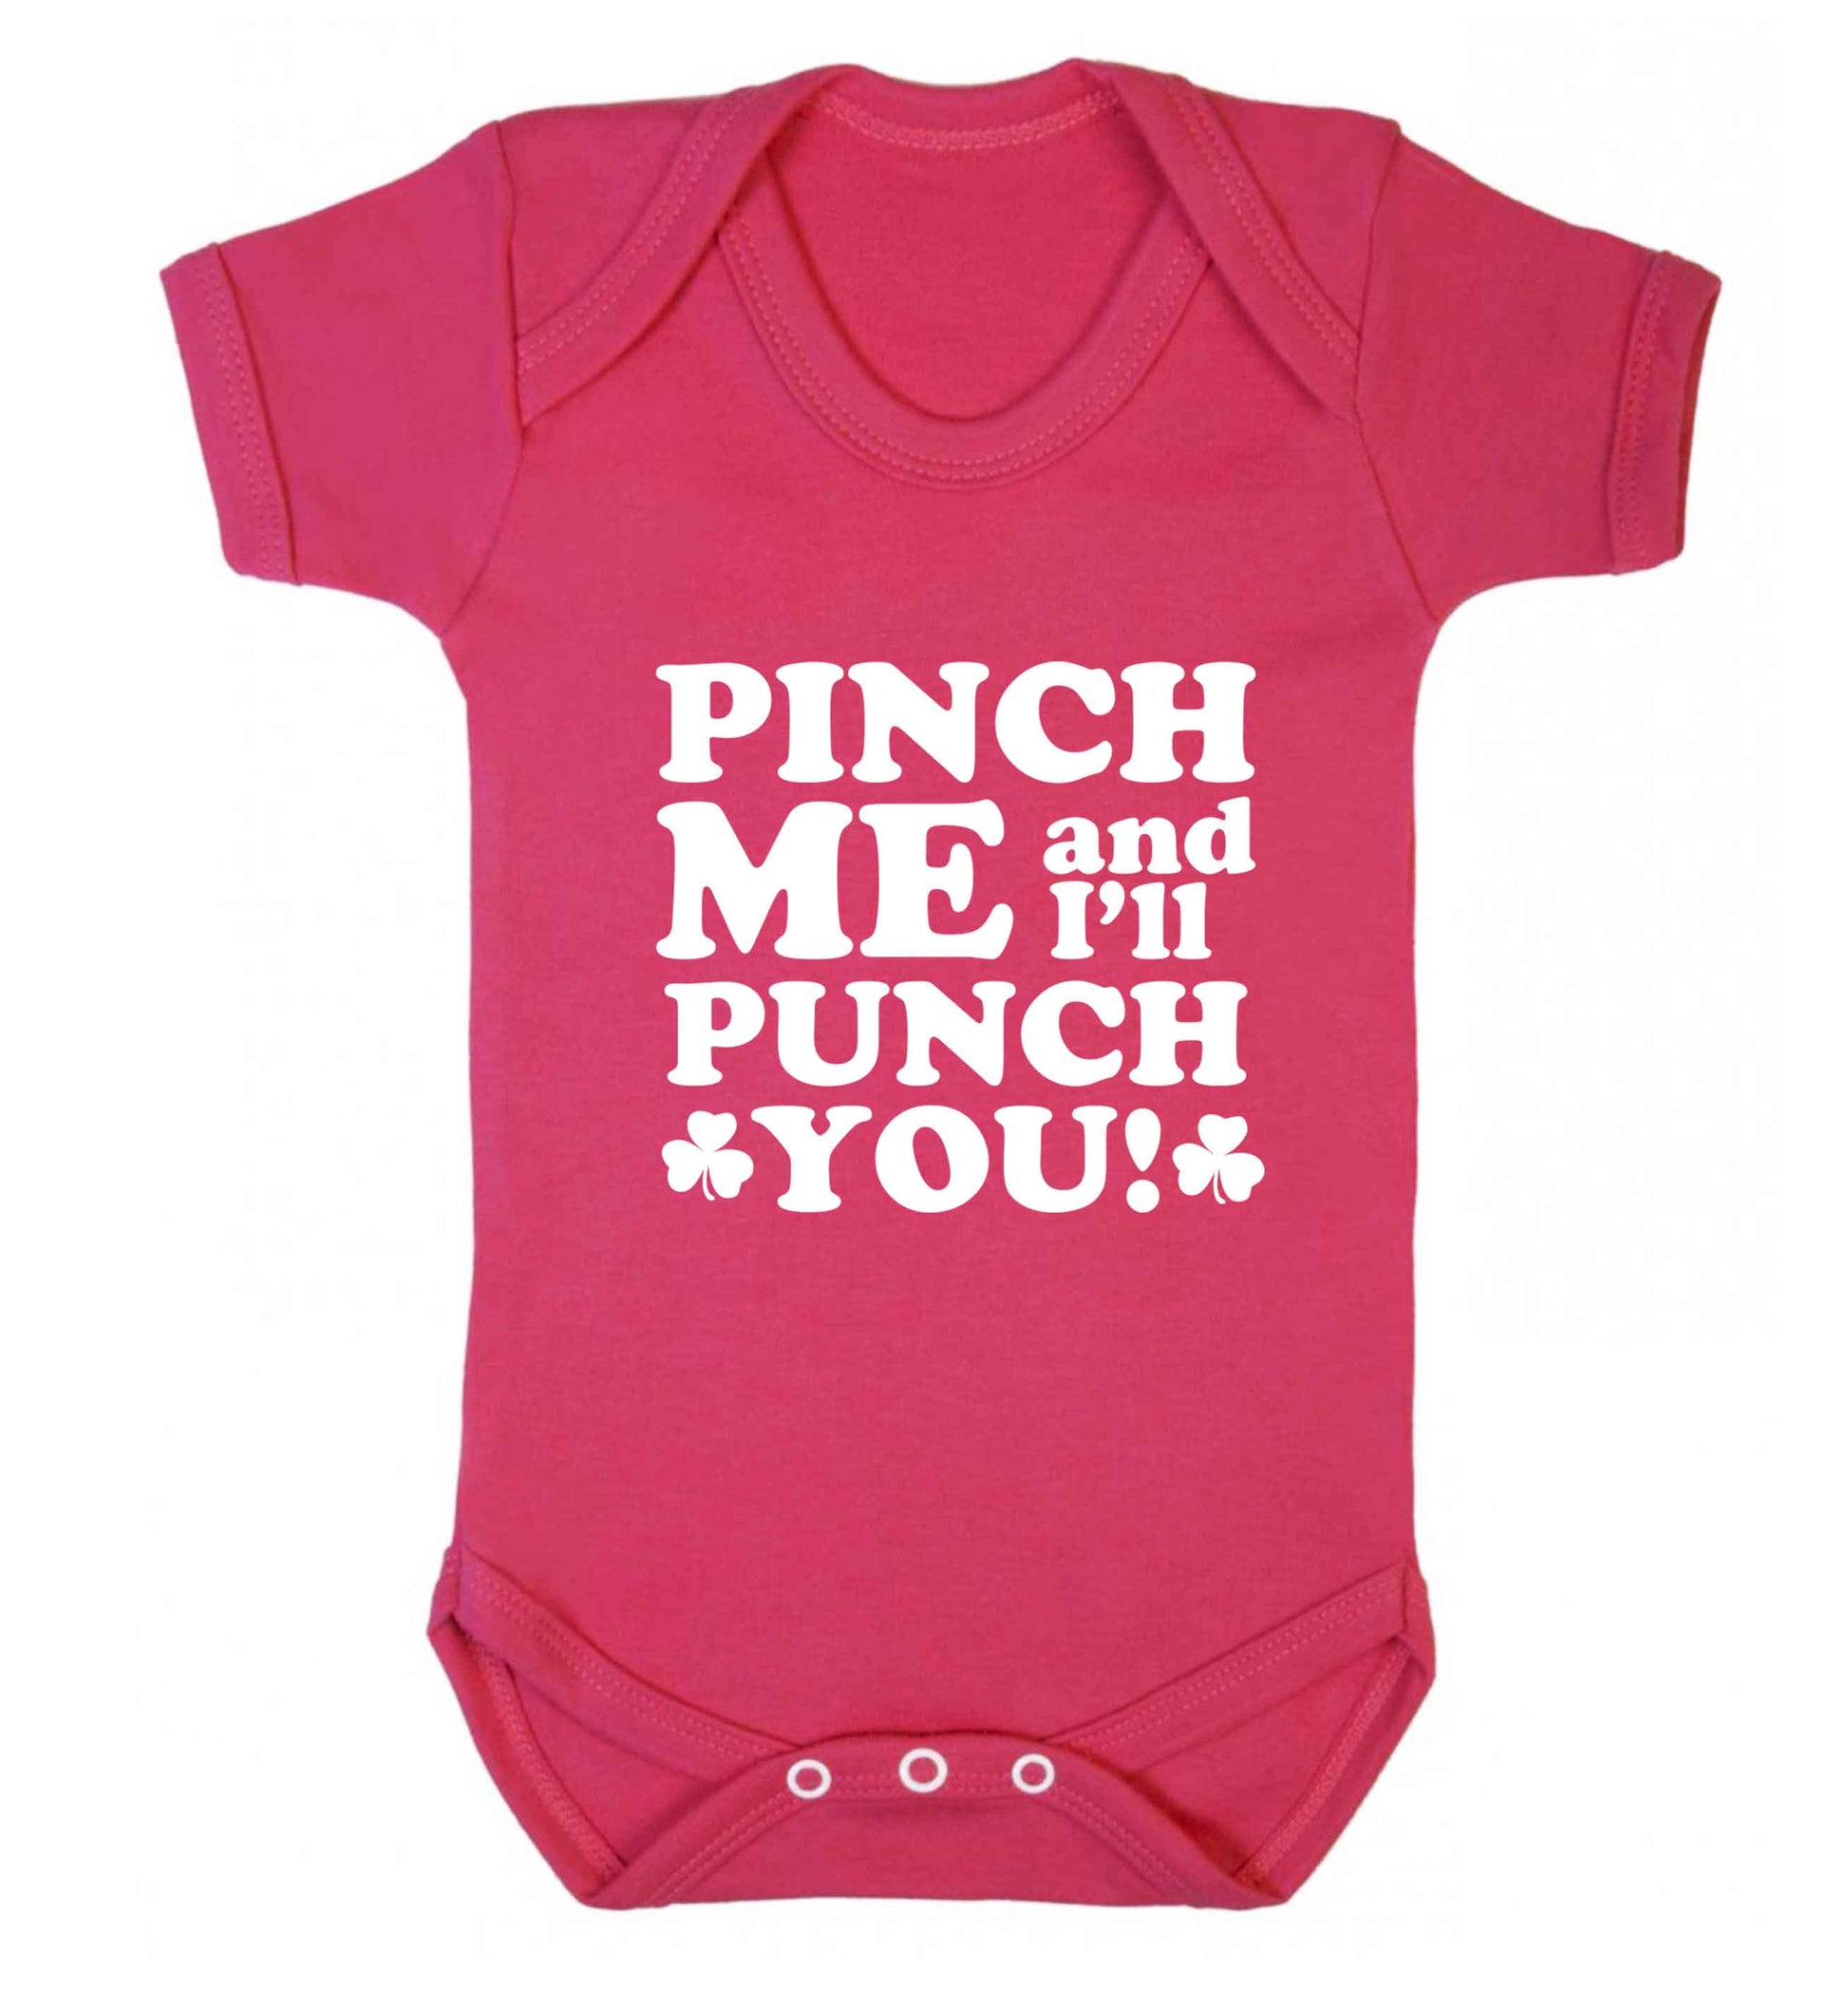 Pinch me and I'll punch you baby vest dark pink 18-24 months